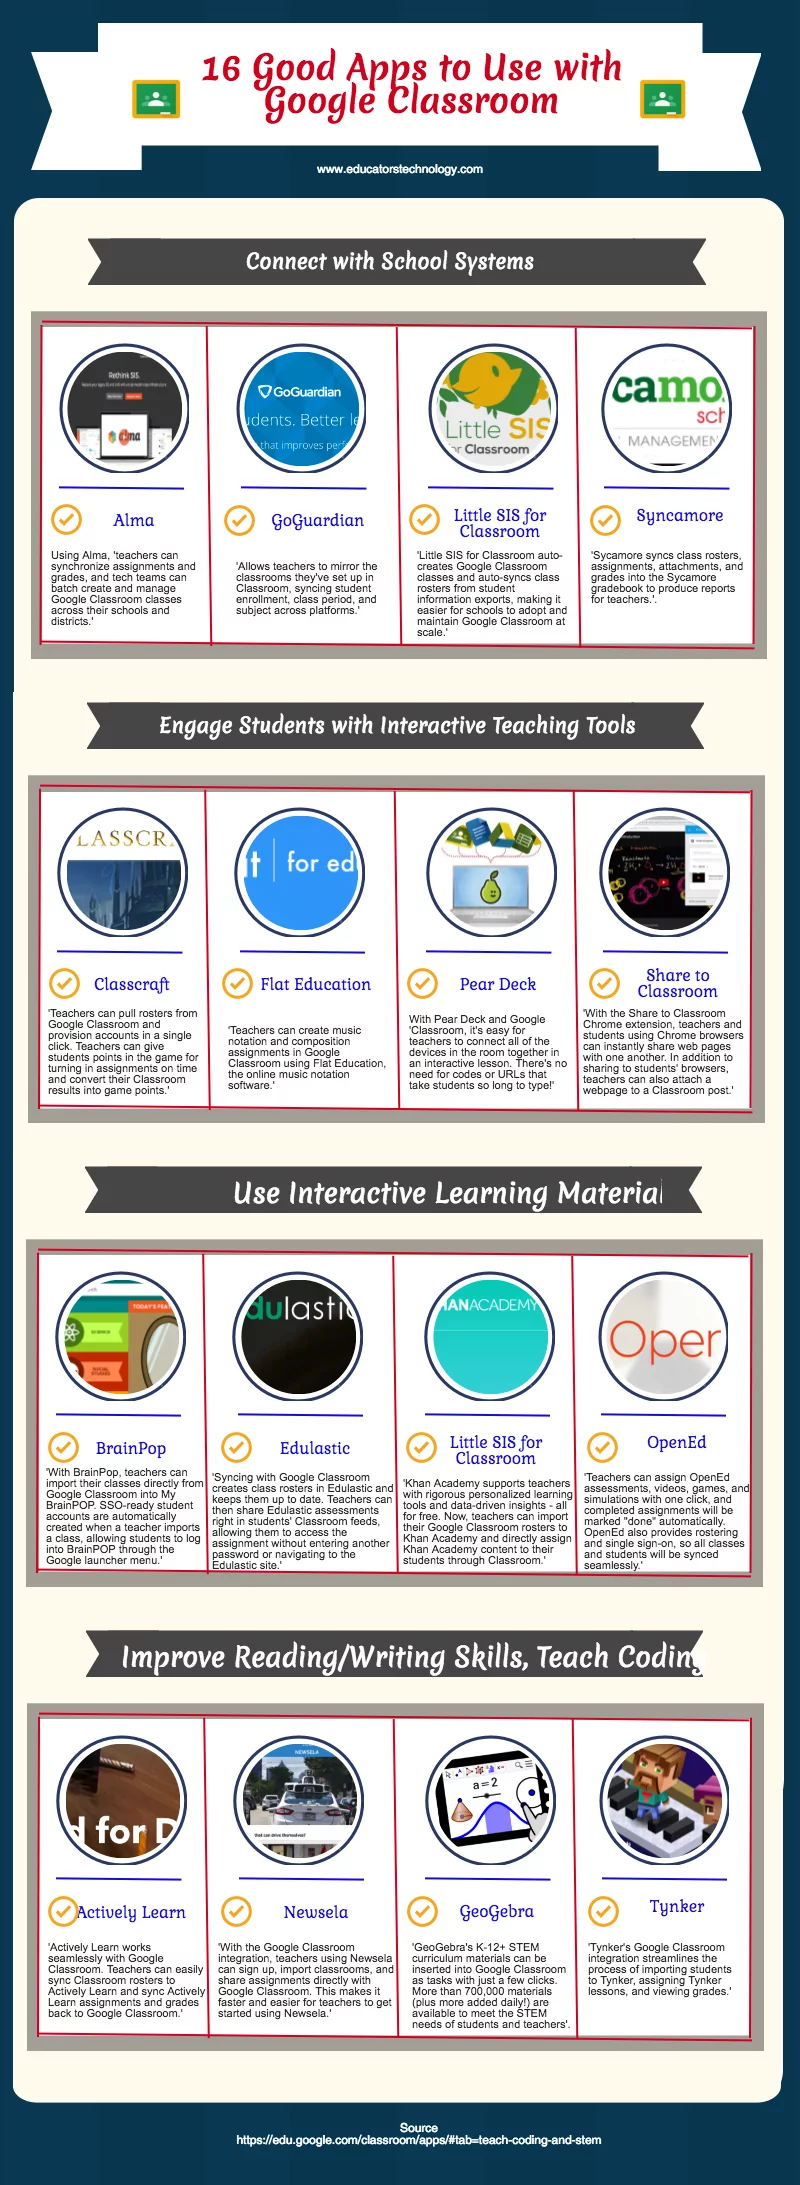 16 Good Apps to Use with Google Classroom